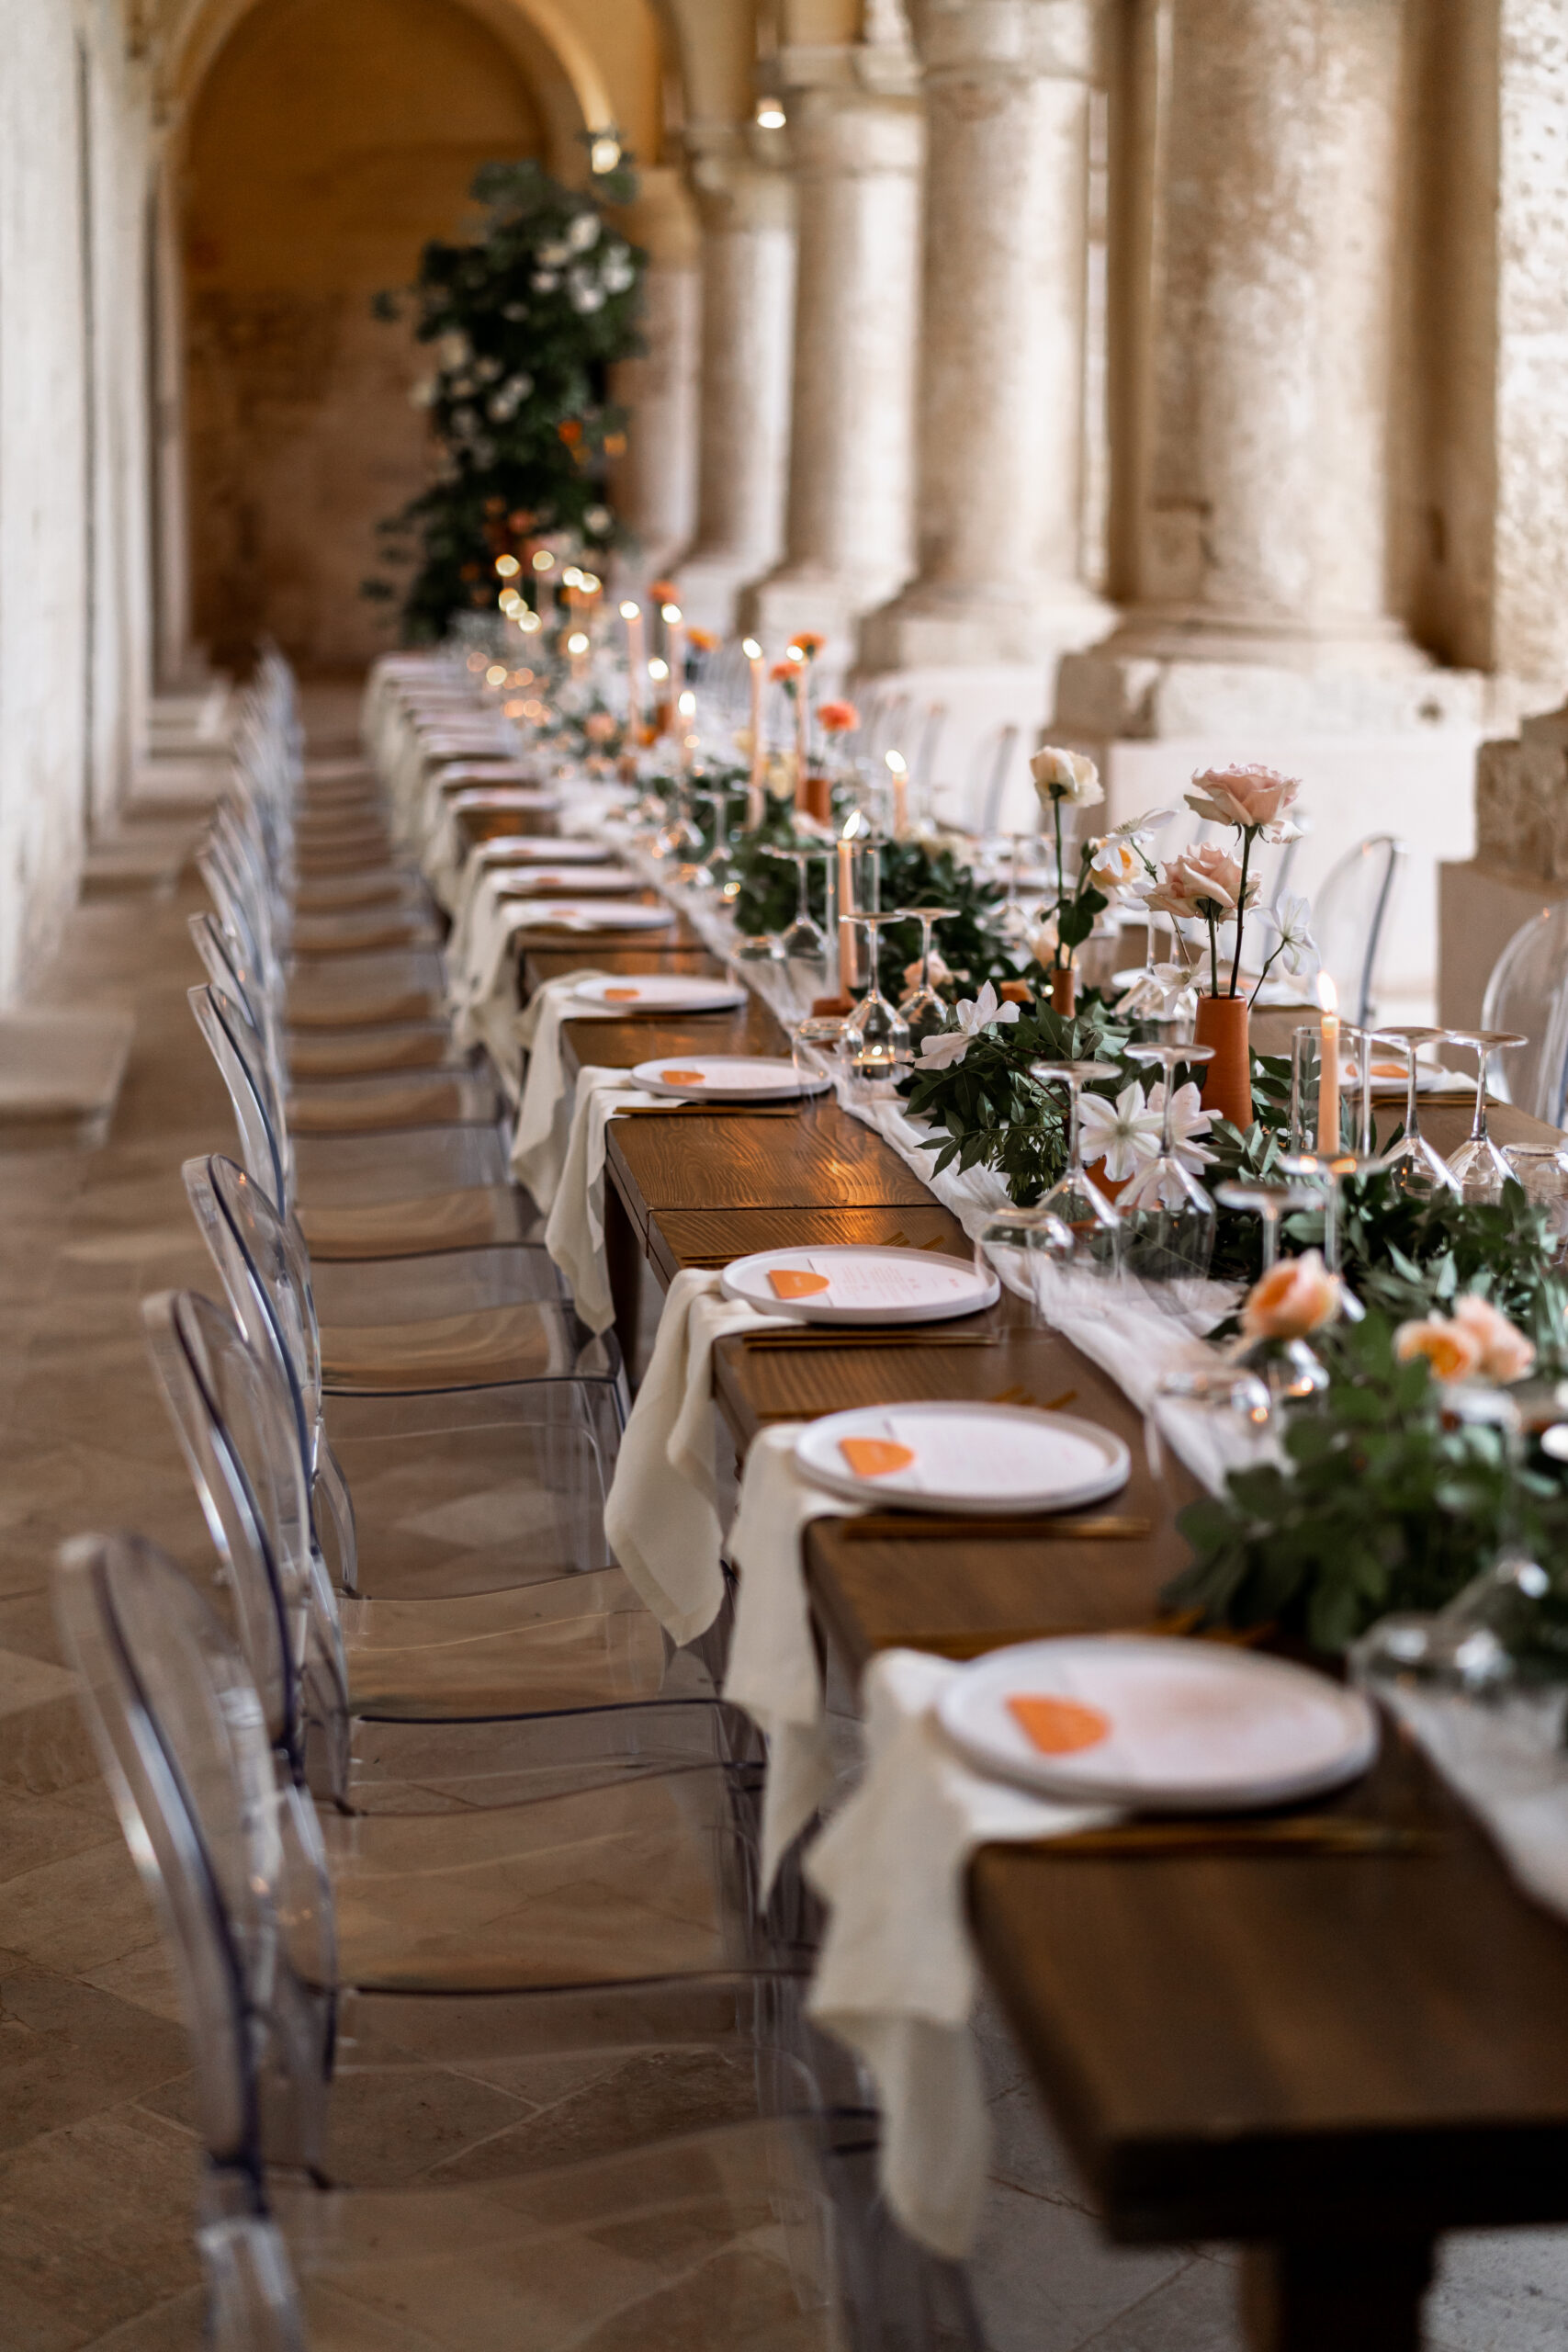 Wedding table with curated terracotta details and bespoke plates set under the columns of a period venue in Puglia, Italy